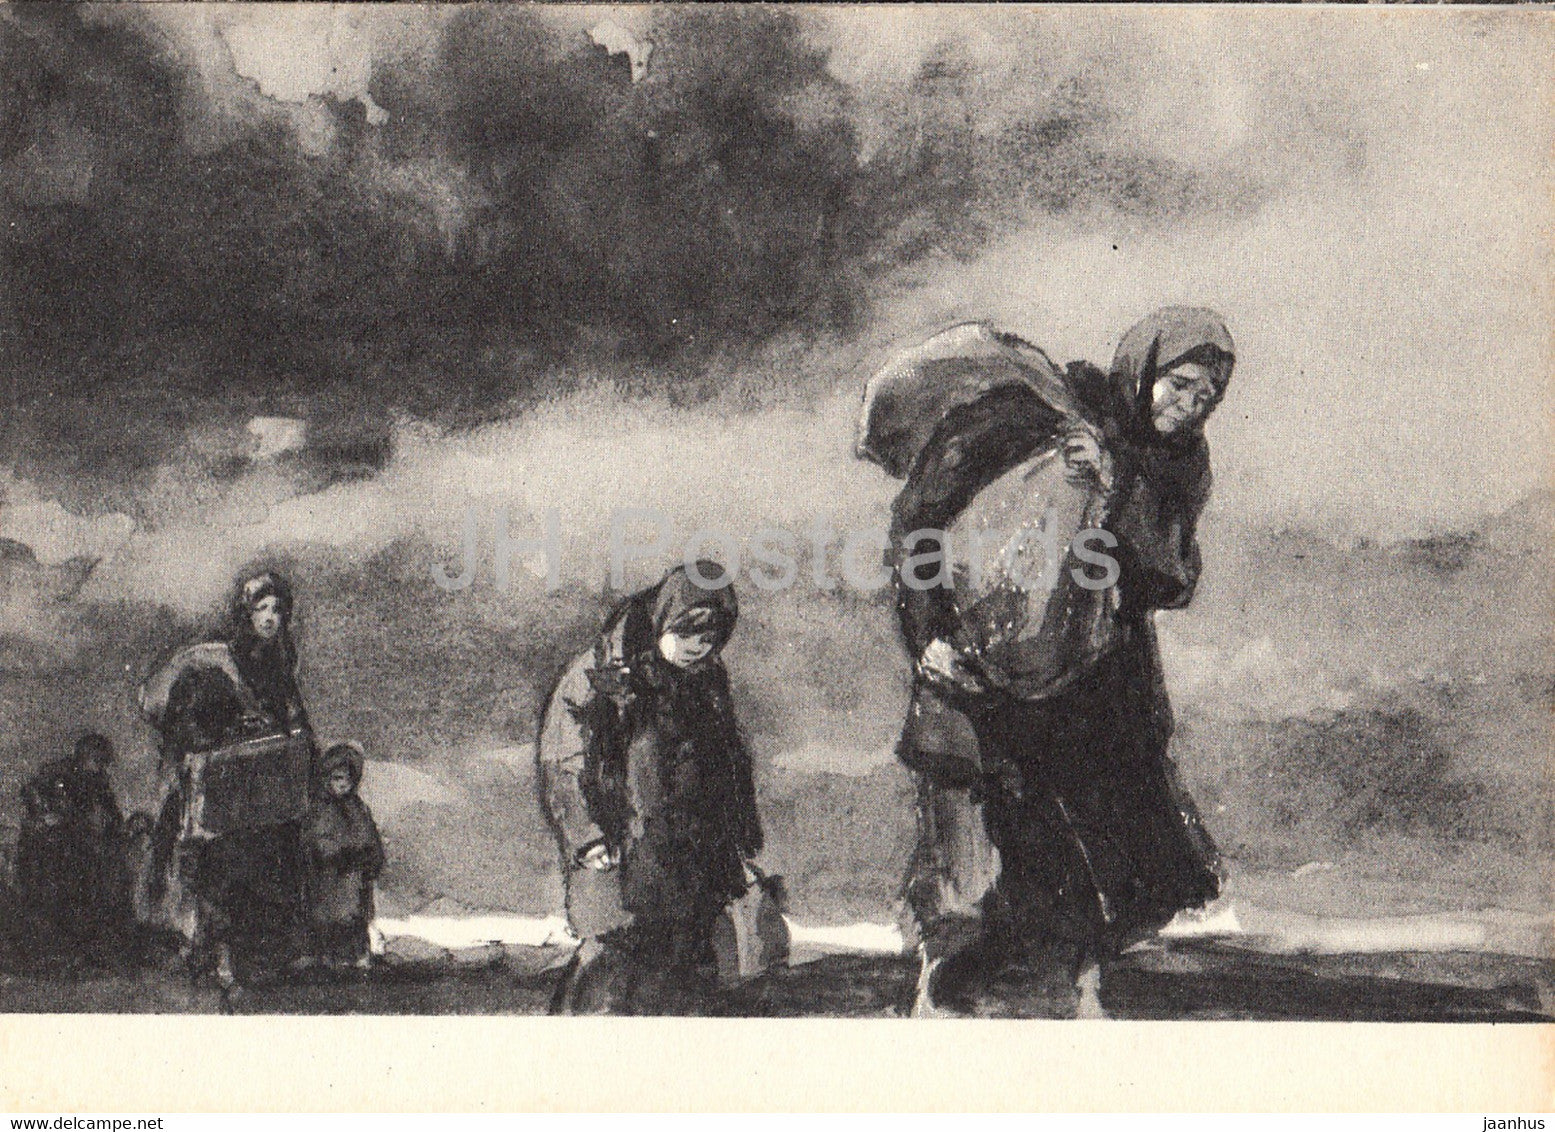 Fate of a Man by Mikhail Sholokhov - illustration by Kukryniksy - Refugees - 1966 - Russia USSR - unused - JH Postcards